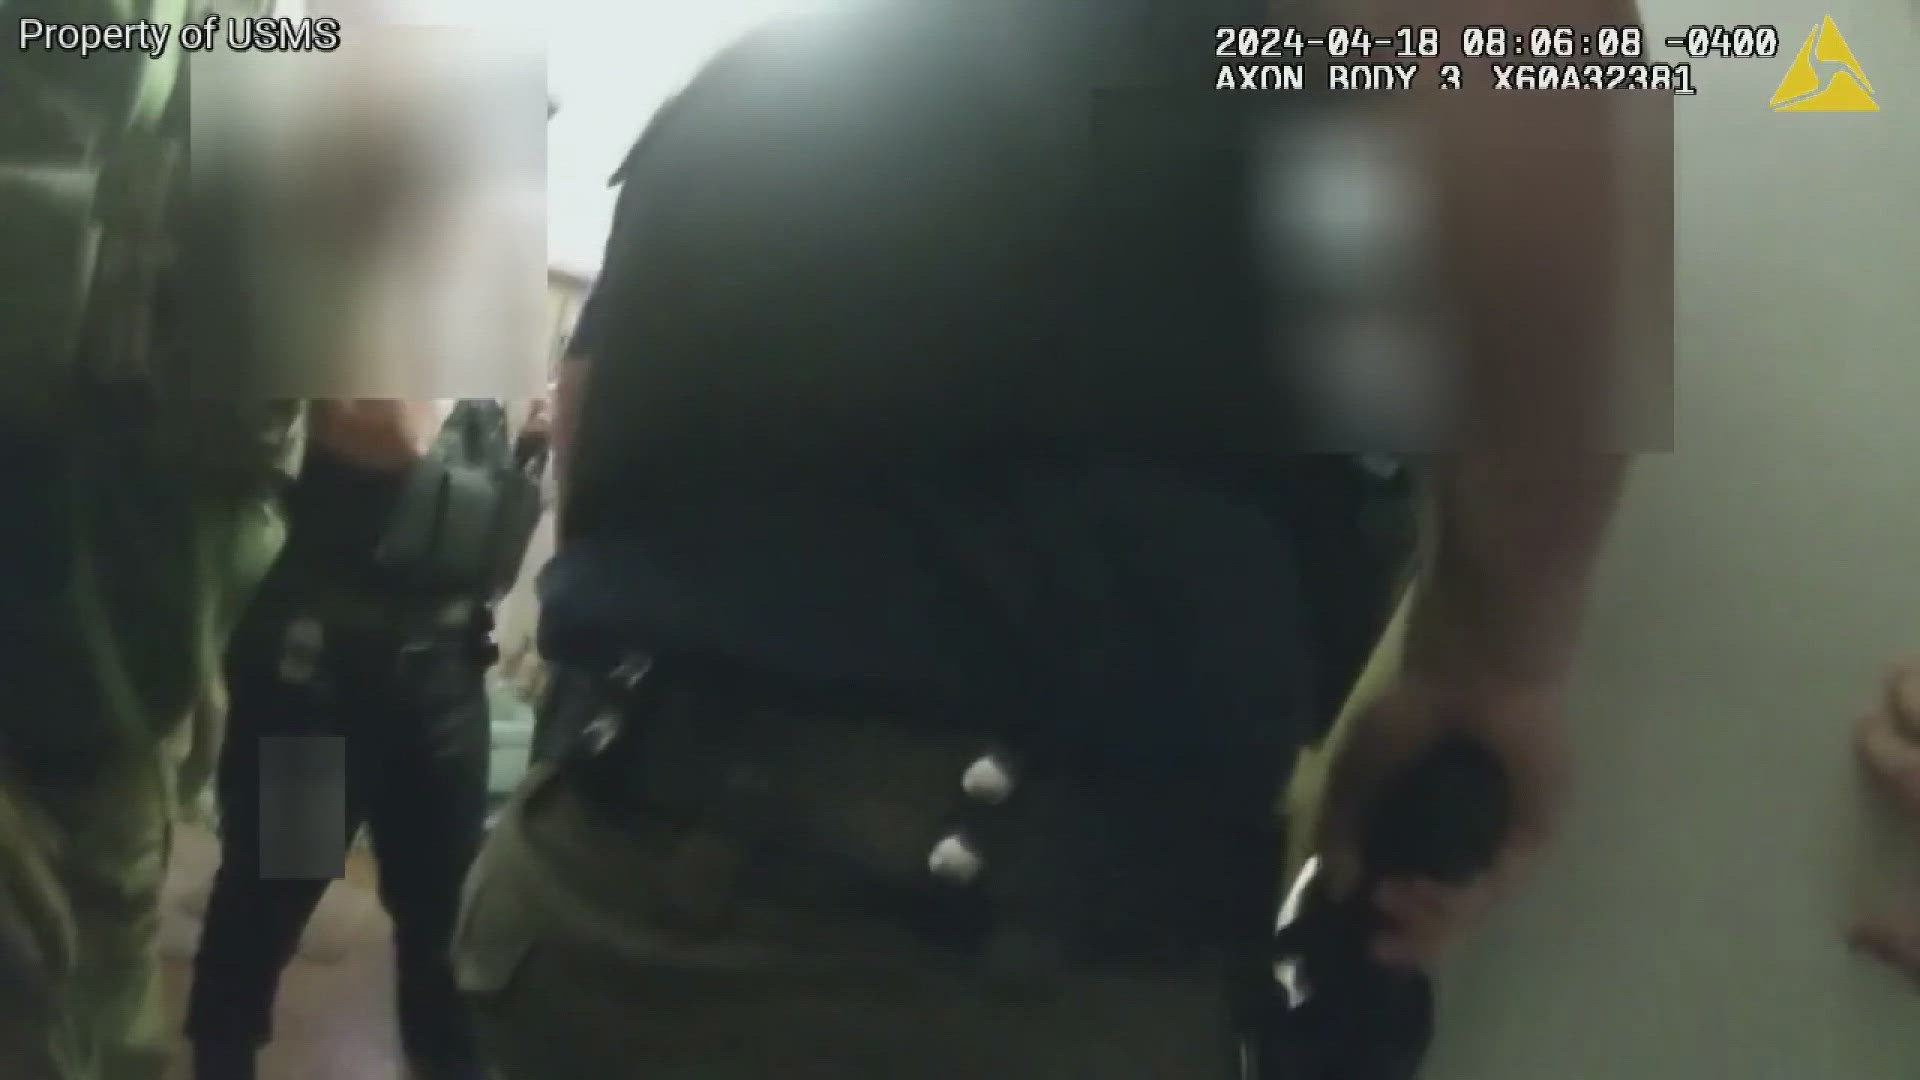 Bodycam video of a deadly shooting in Lorain has been released, showing the moments US Marshals opened fire on a man who allegedly attacked them with a table leg.